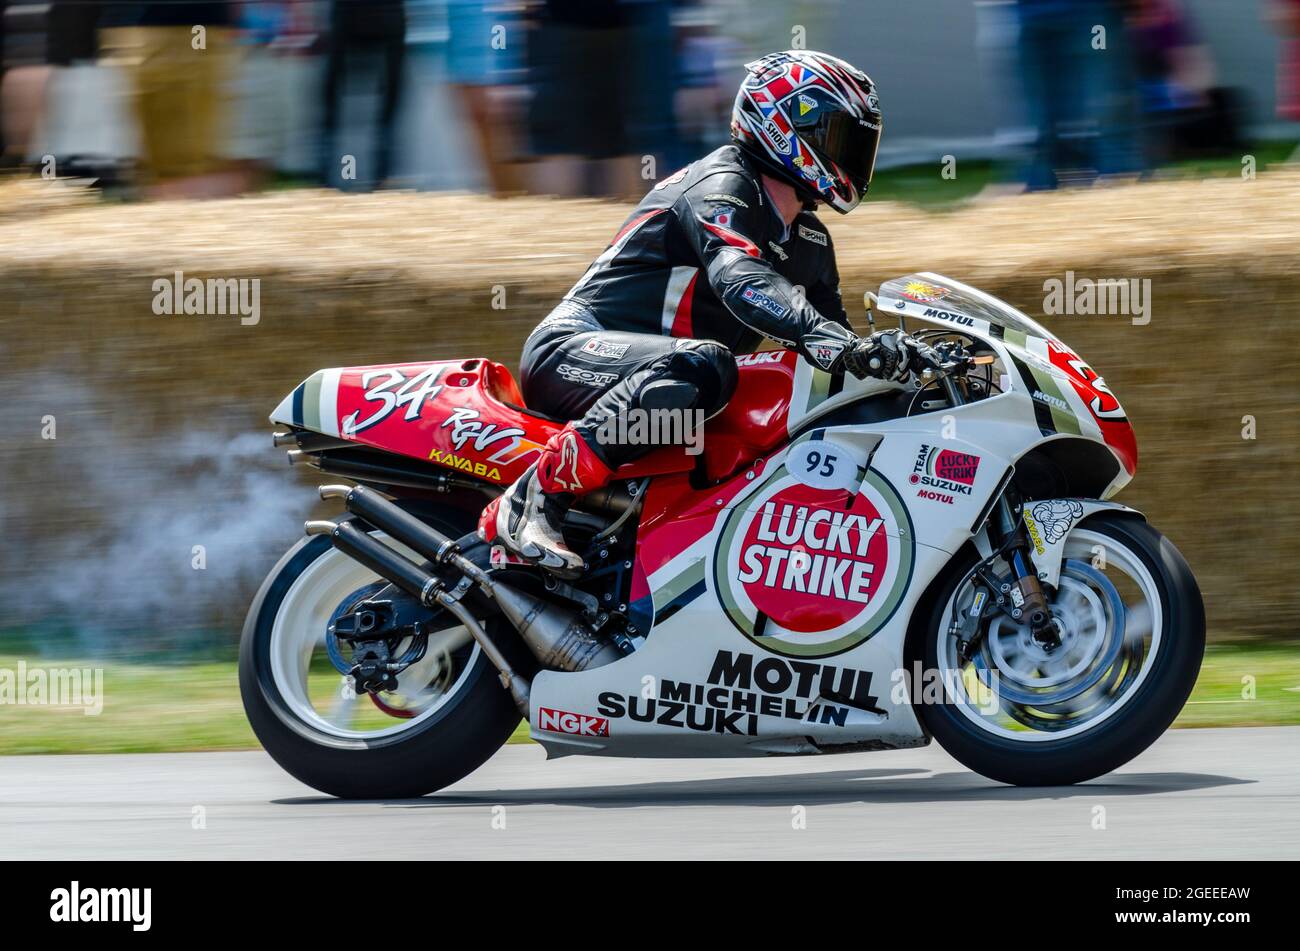 1995 Lucky Strike Suzuki RGV500 Grand Prix motorcycle racing up the hill climb track at the Goodwood Festival of Speed motor racing event 2014 Stock Photo